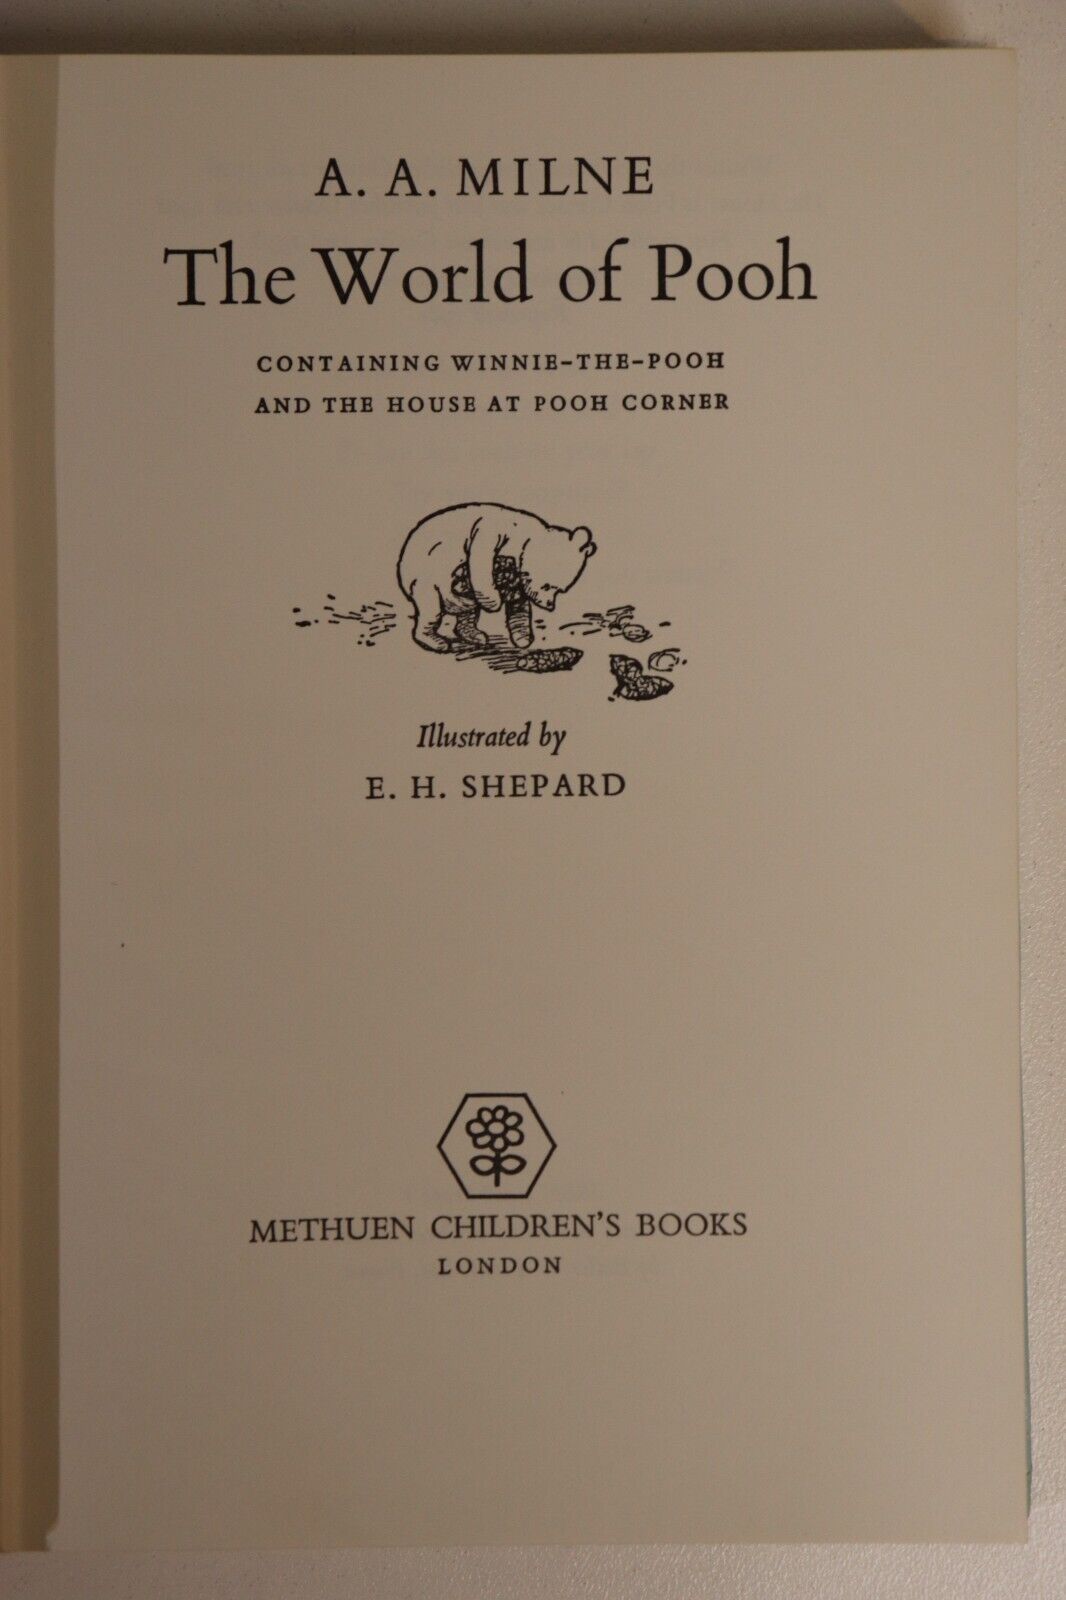 The World Of Pooh by A. A. Milne - 1981 - Children's Story Book - 0